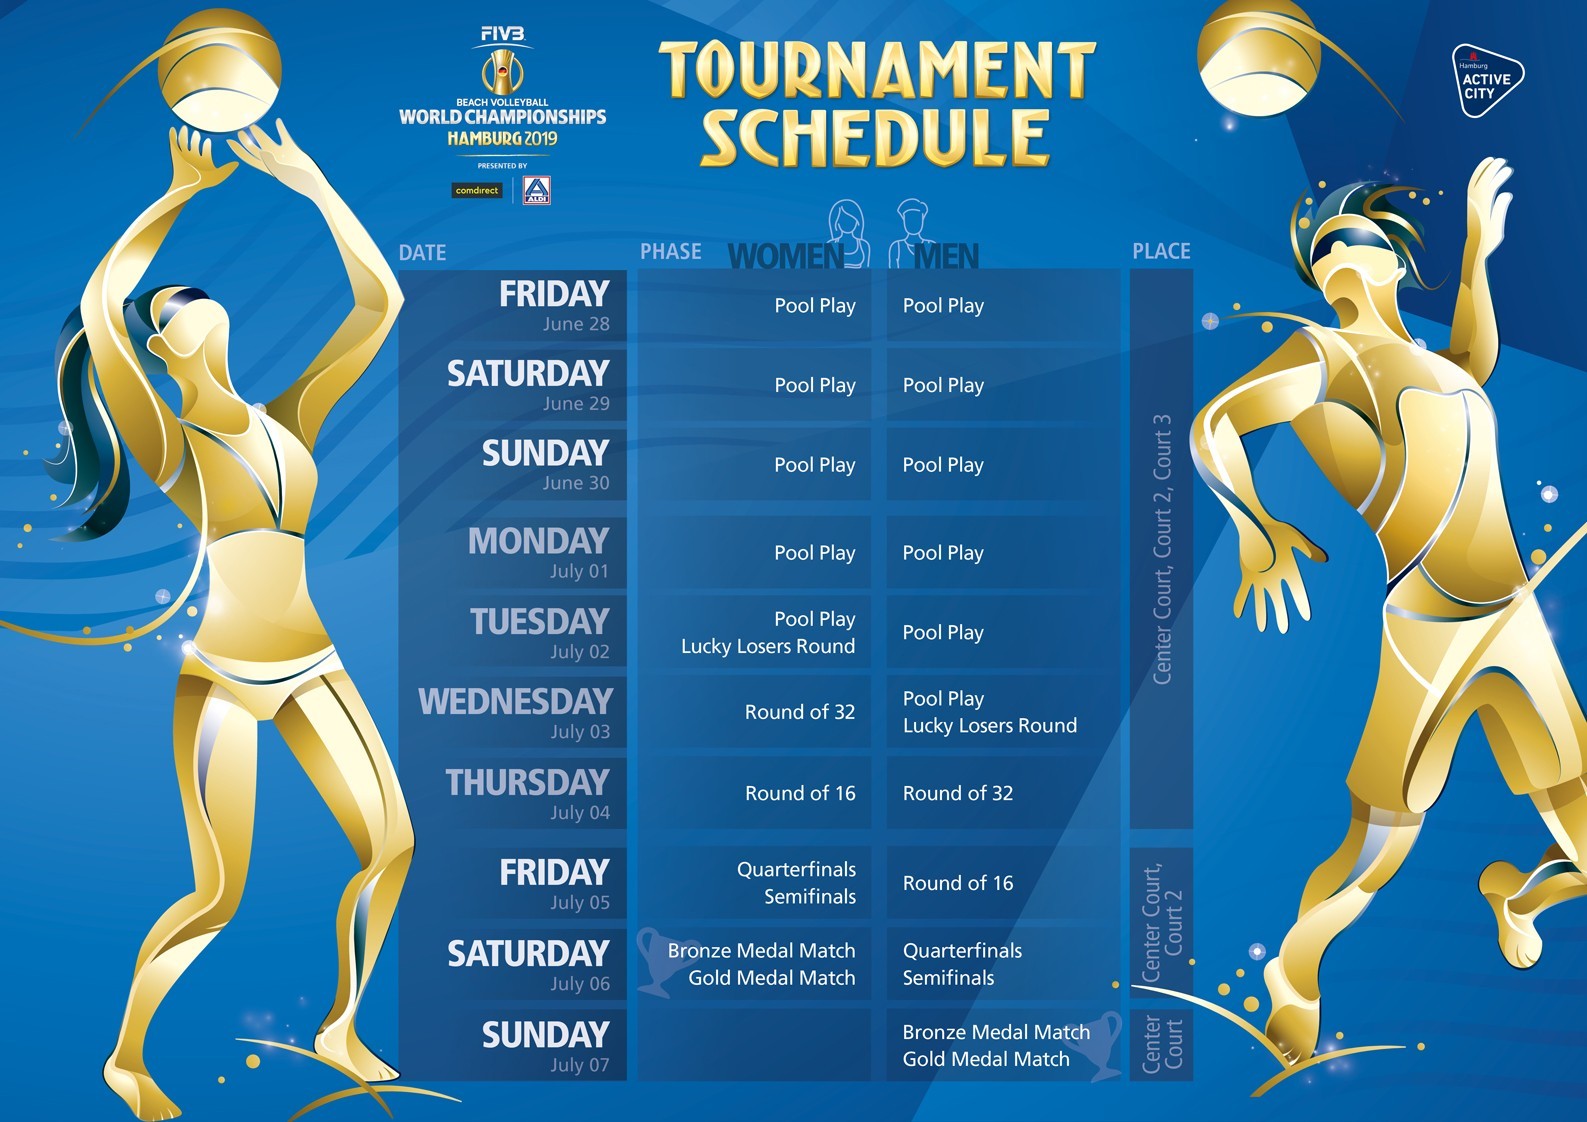 The FIVB  World Championships 2019 tournament schedule